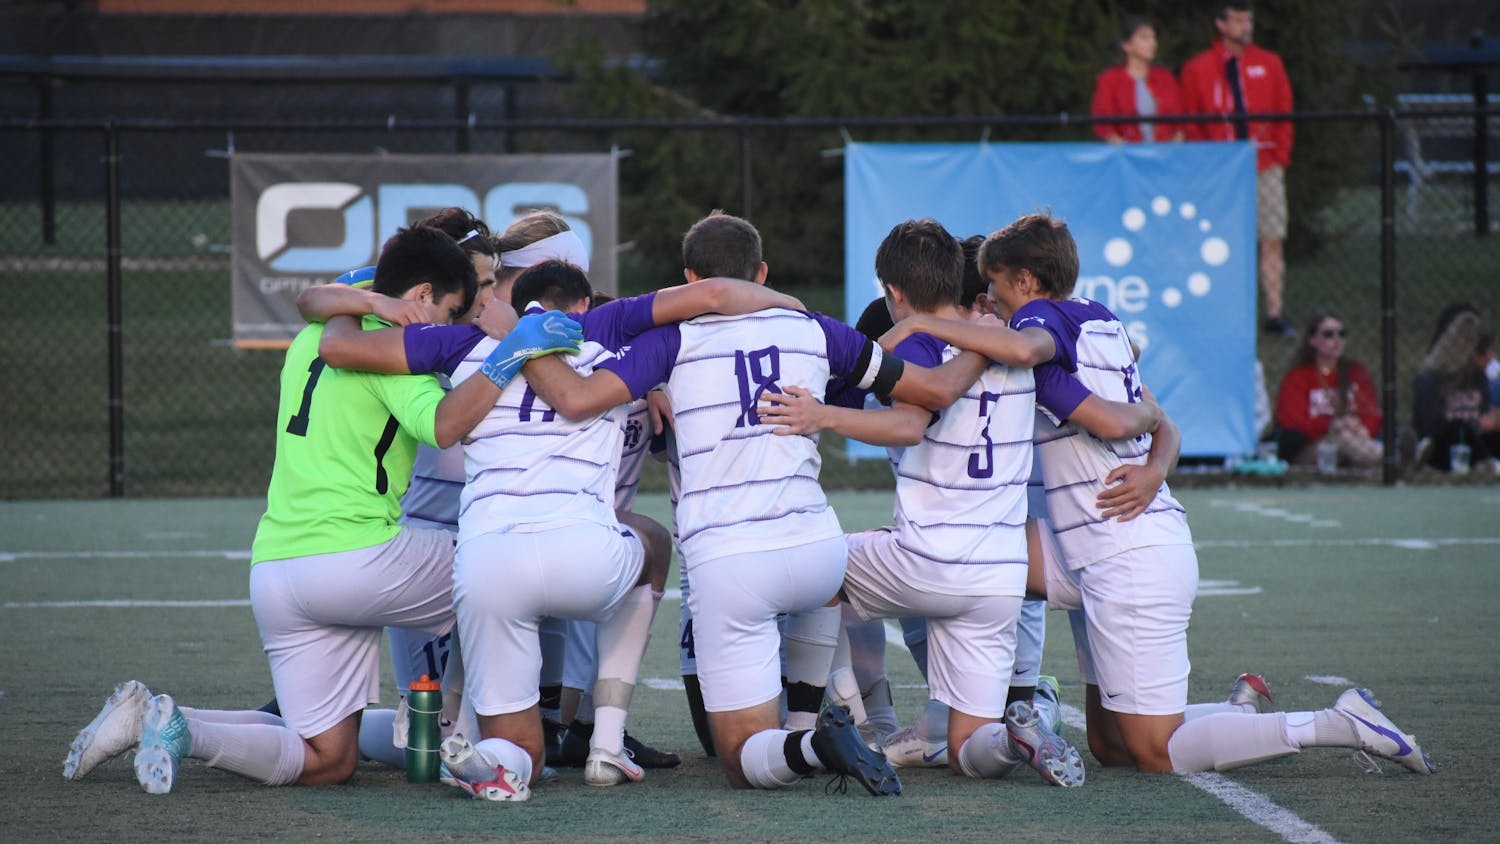 Taylor men’s soccer couldn’t follow up victory over St. Francis with another vs. Grace